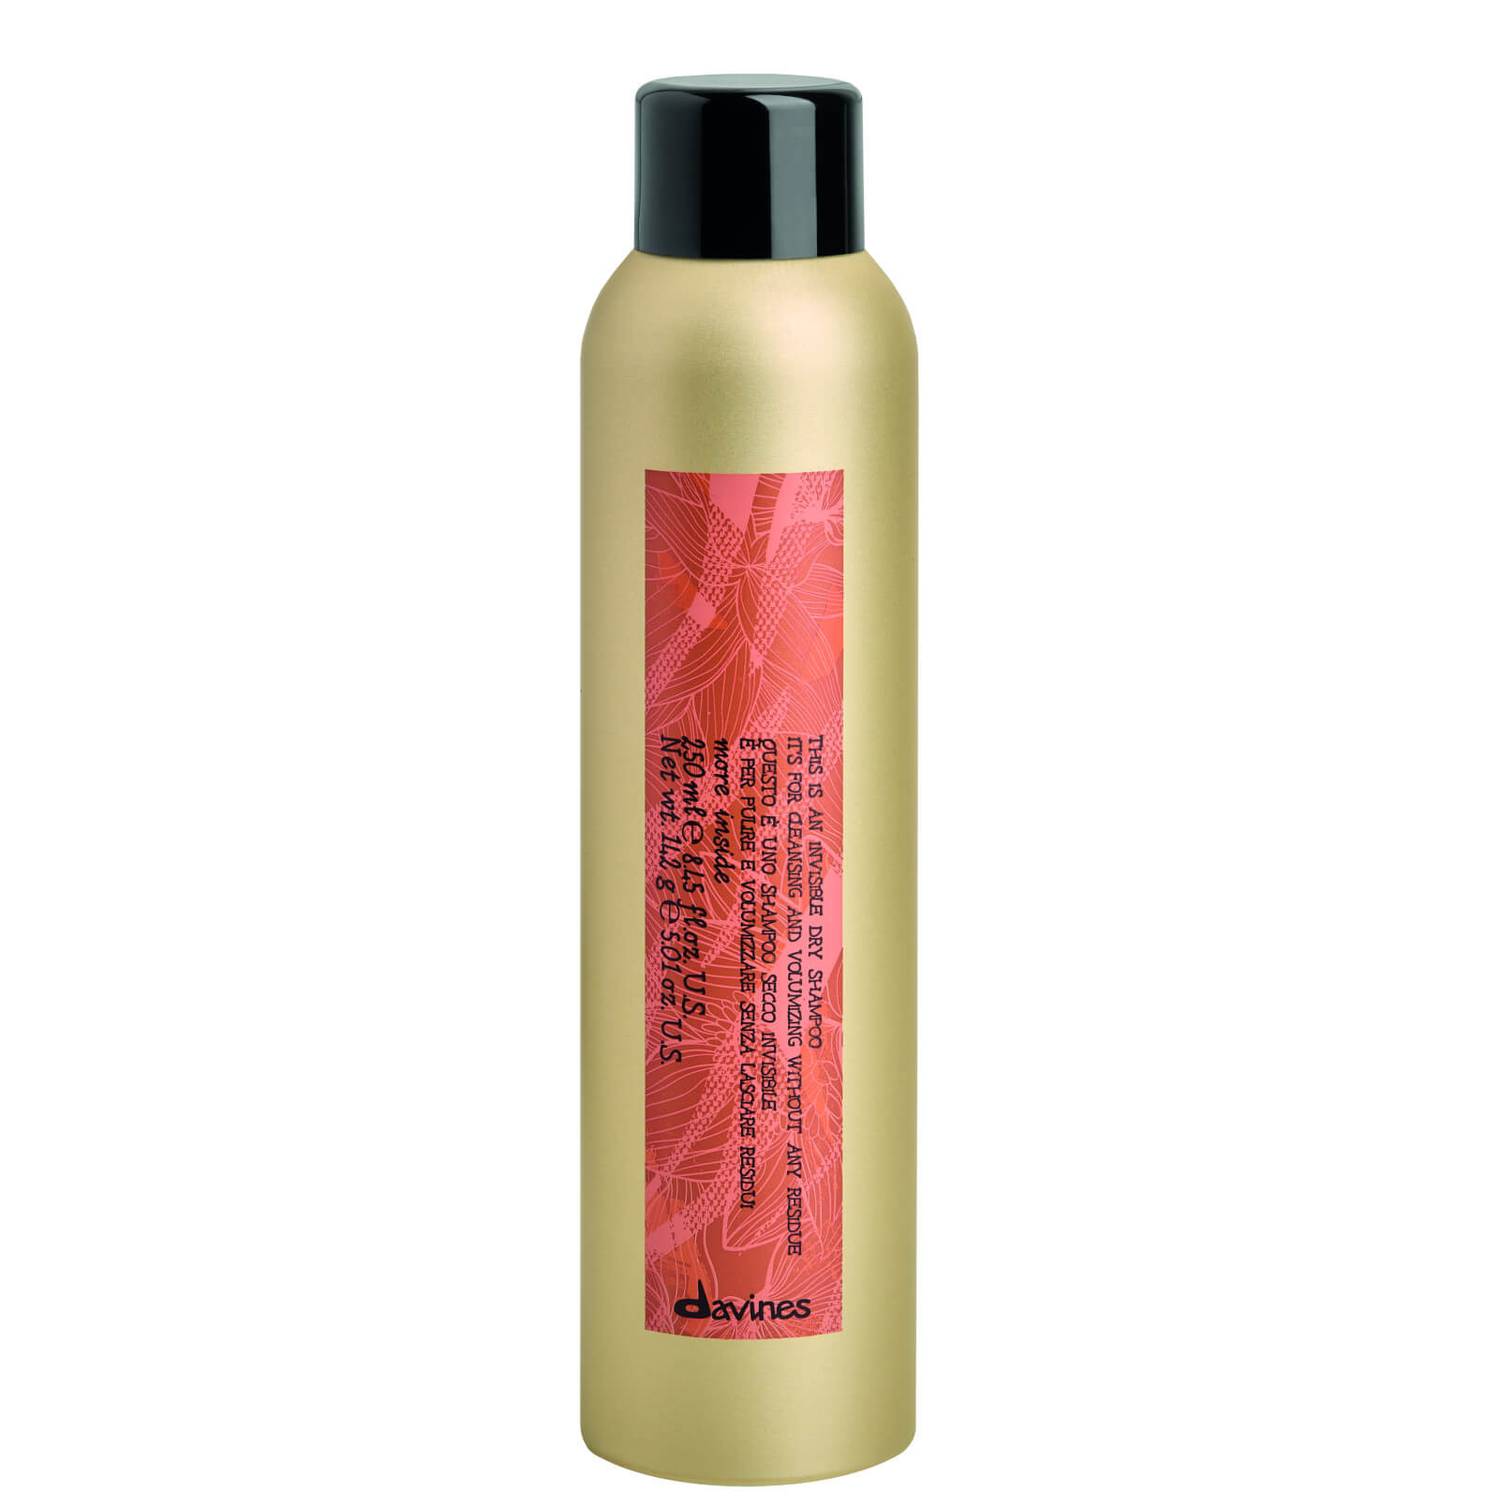 This Is An Invisible Dry Shampoo 250ml